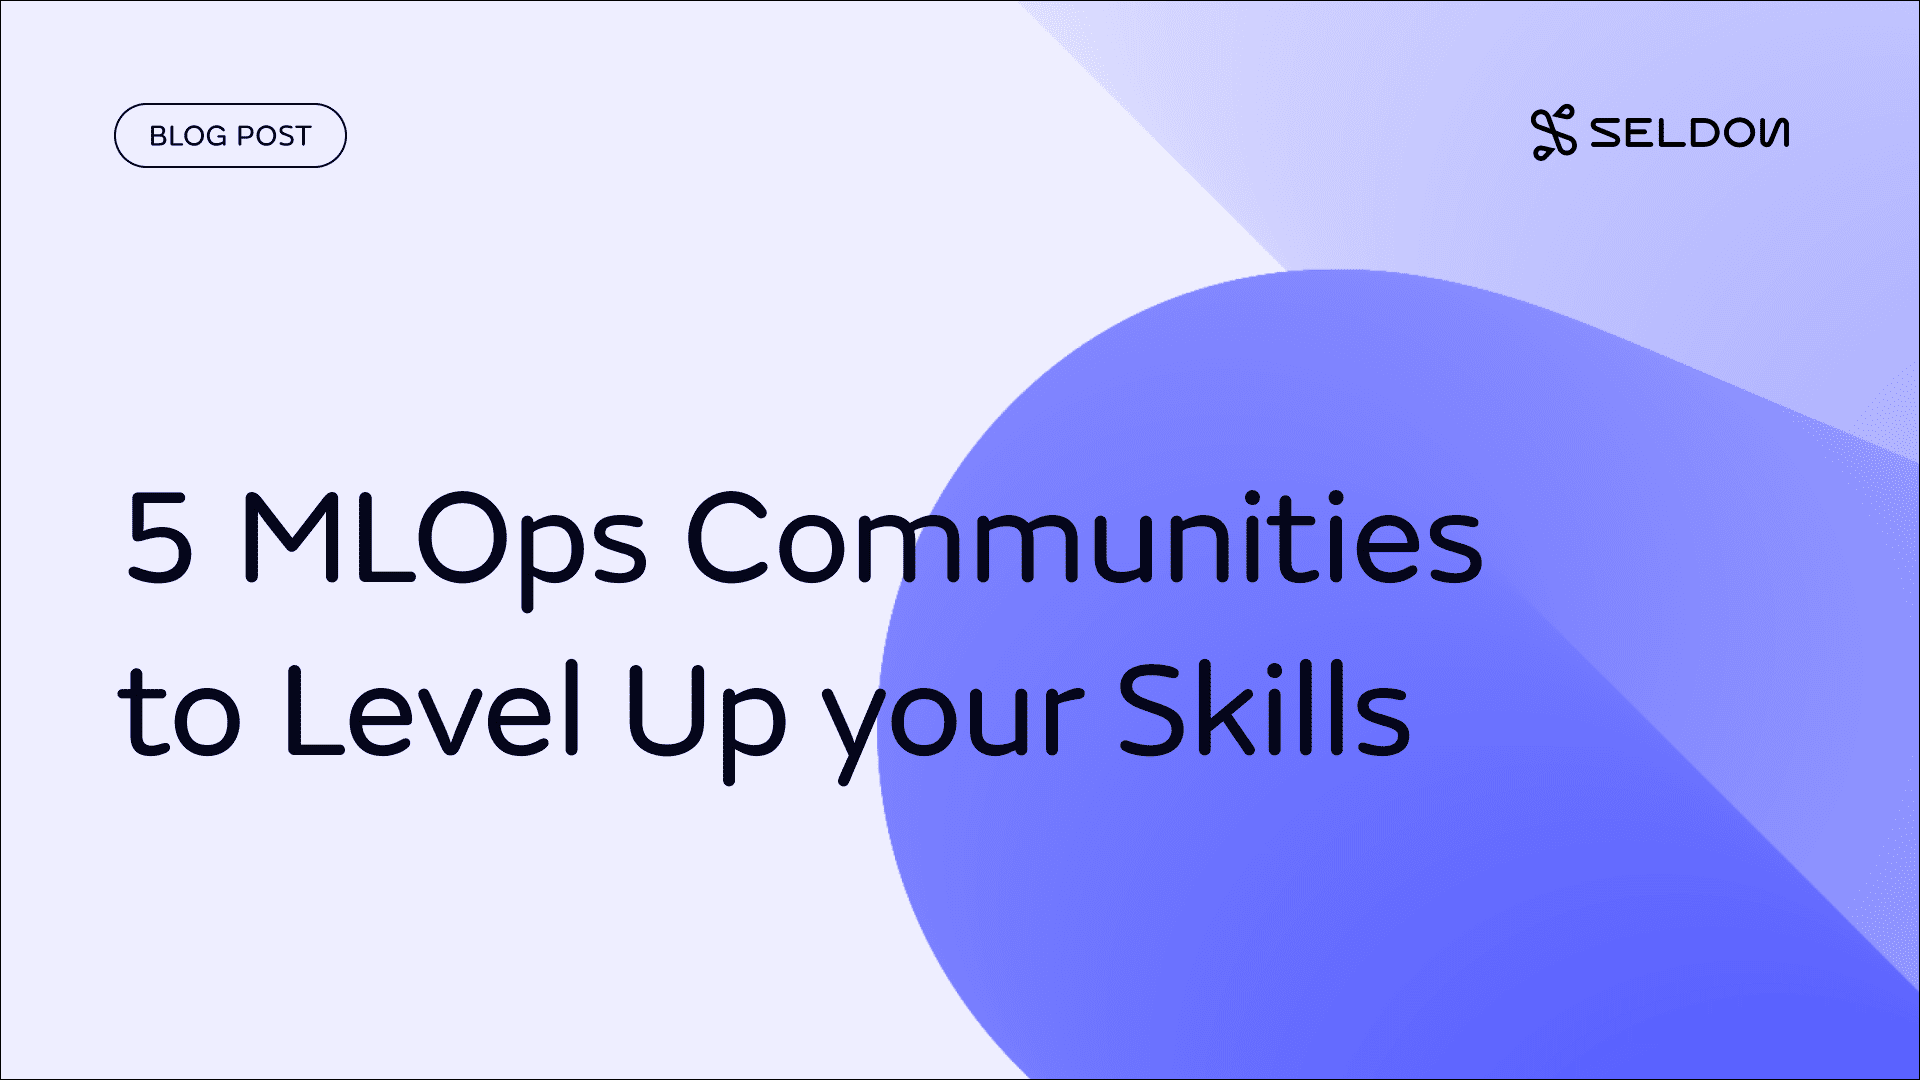 5 MLOps Communities to Level Up Your Skills